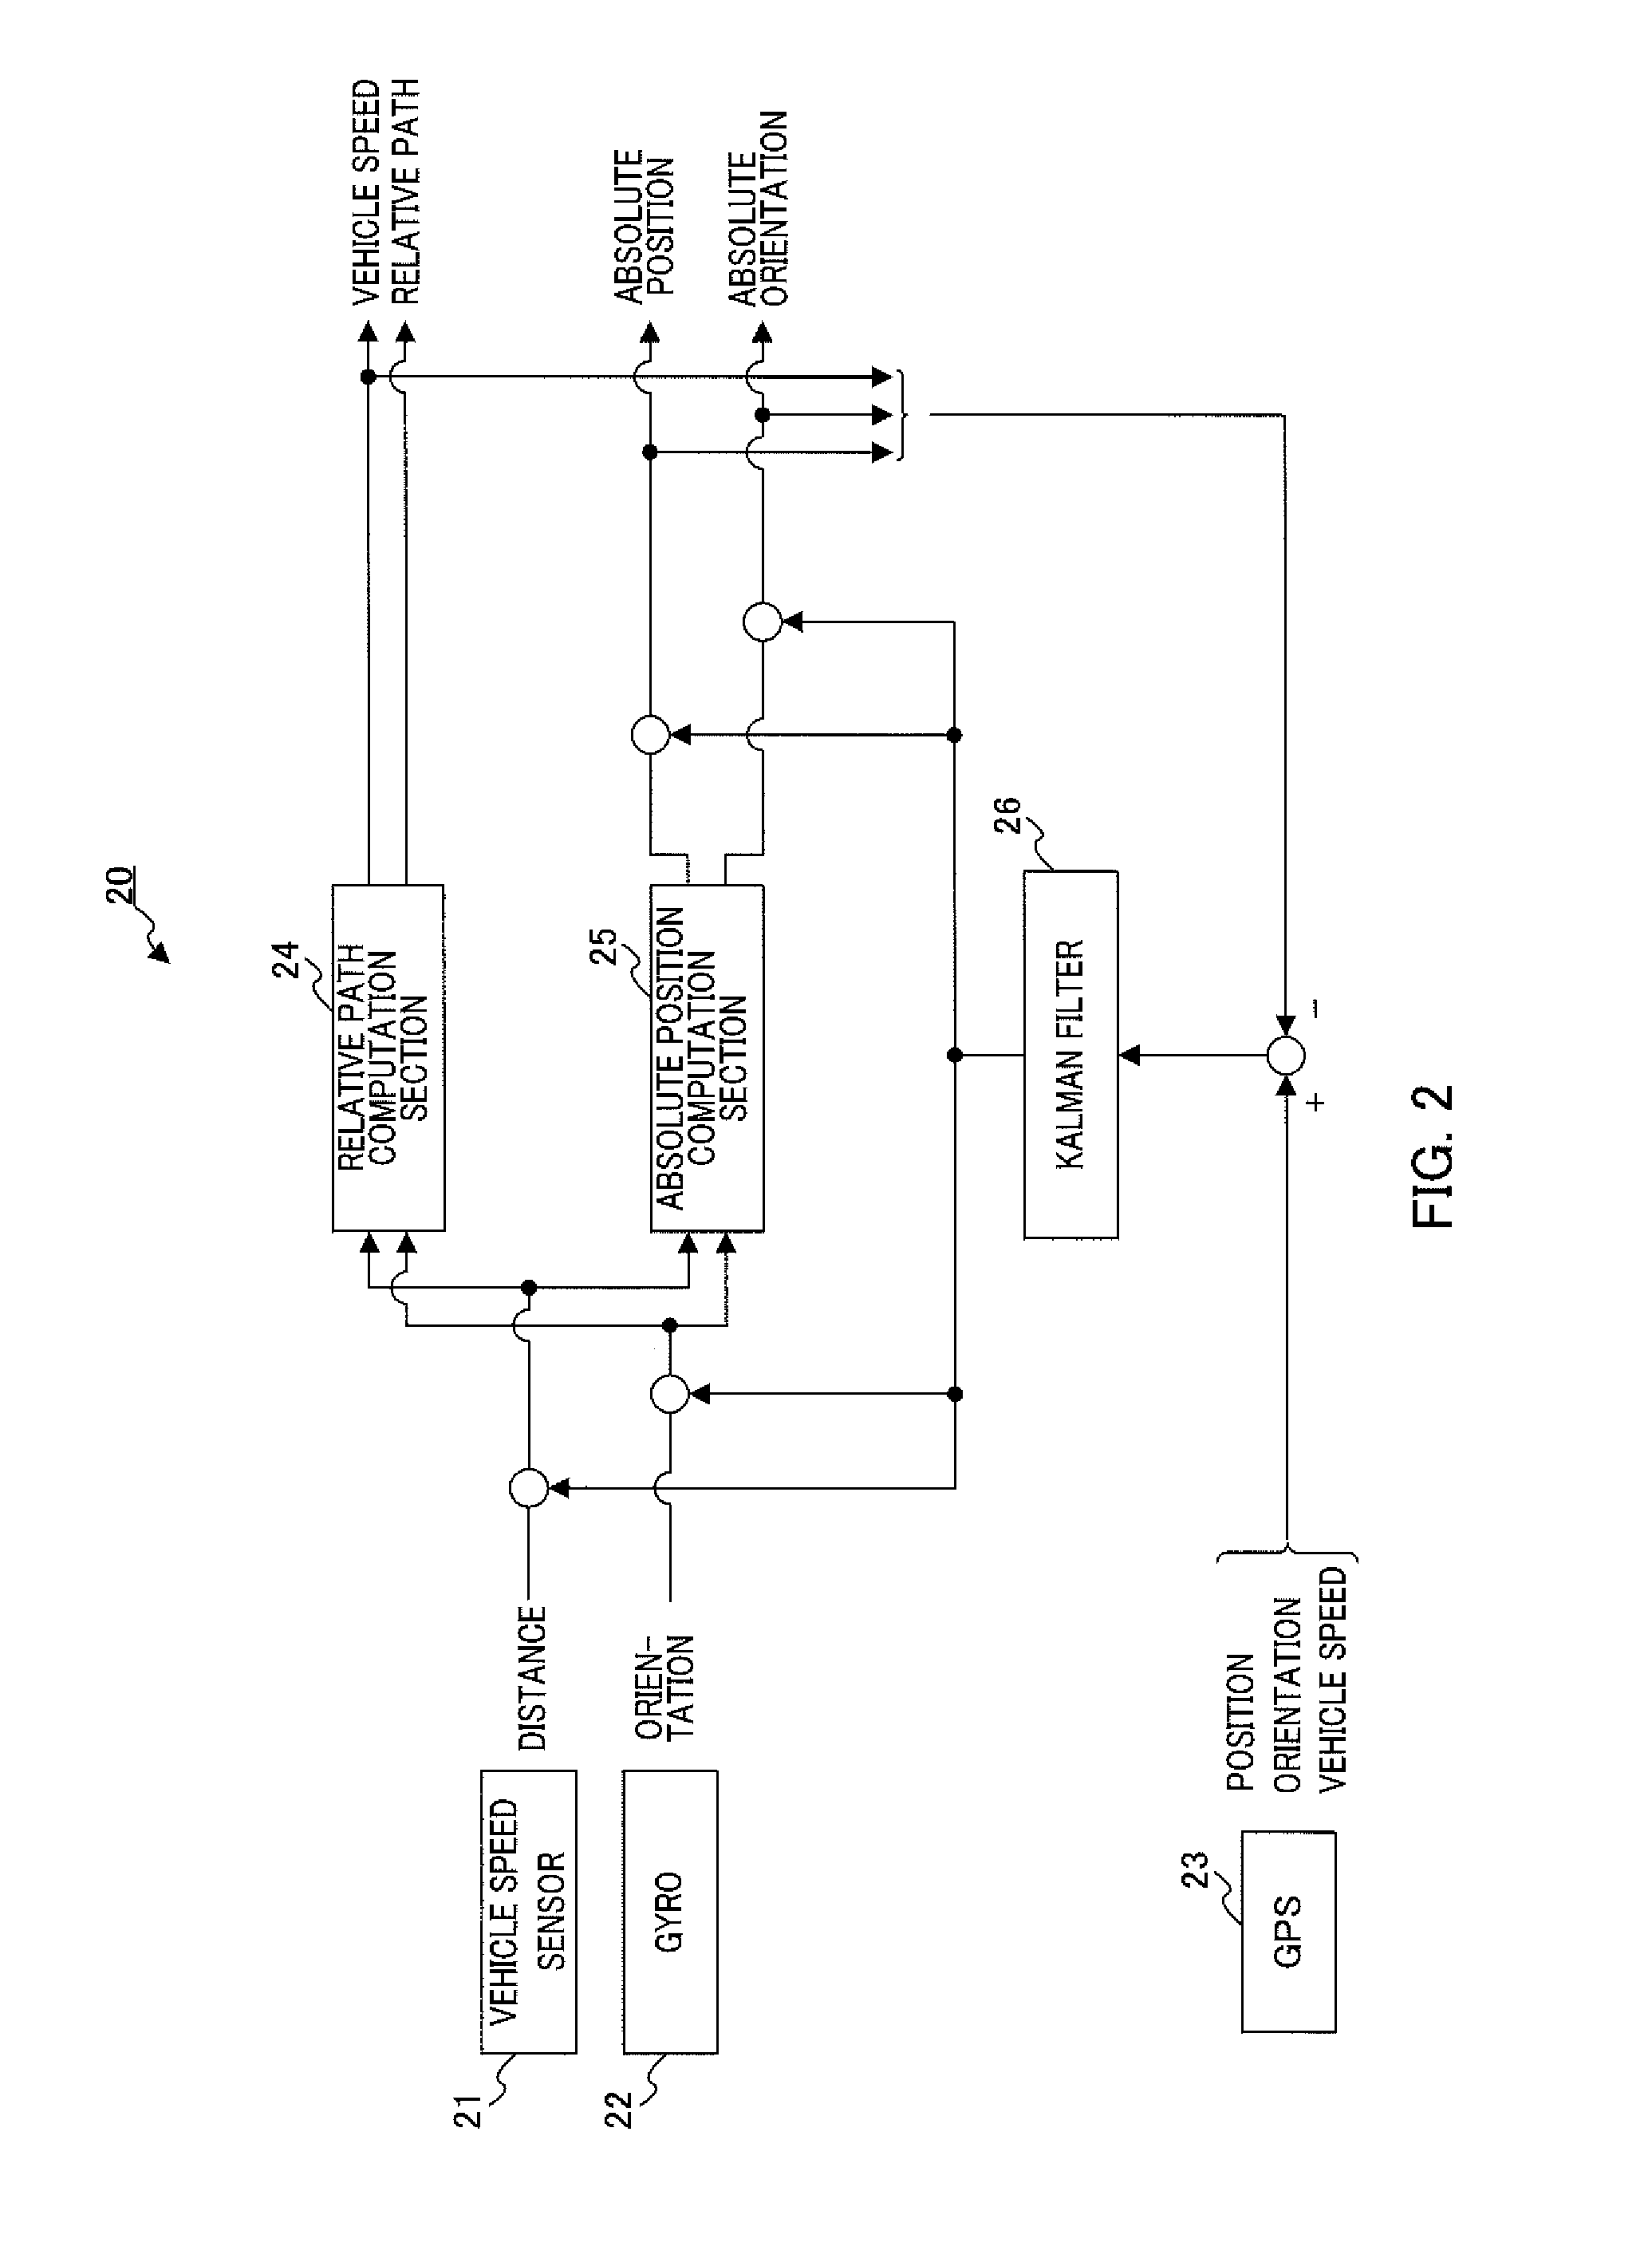 Traffic accident detection device and method of detecting traffic accident